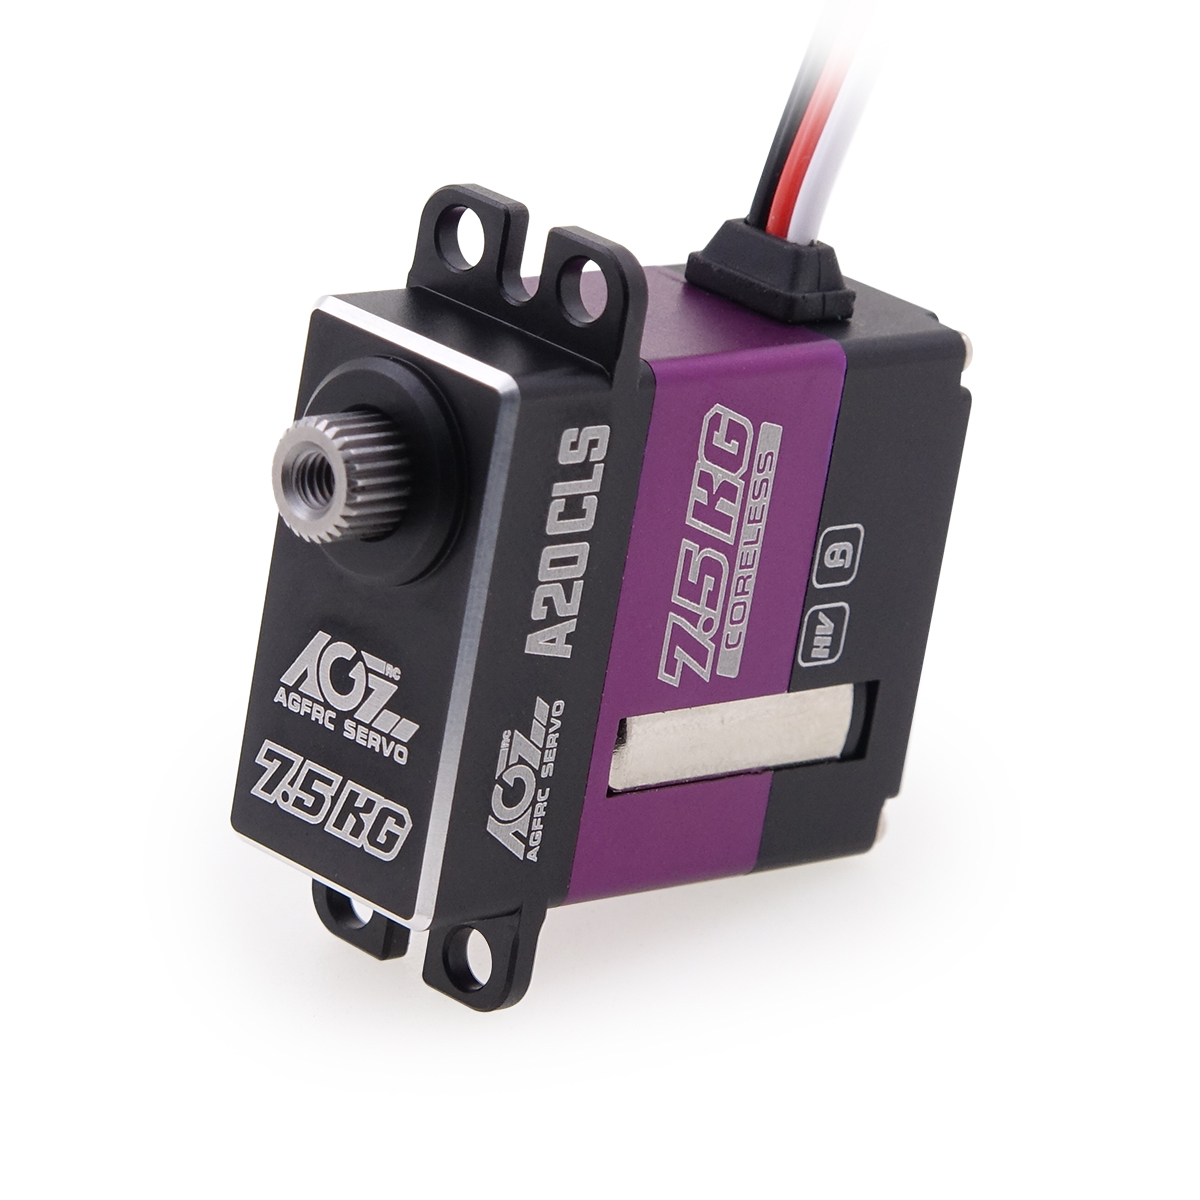 AGF A20CLS 9g Micro 5KG Coreless Metal Gear Digital Servo For 450 RC Helicopter 